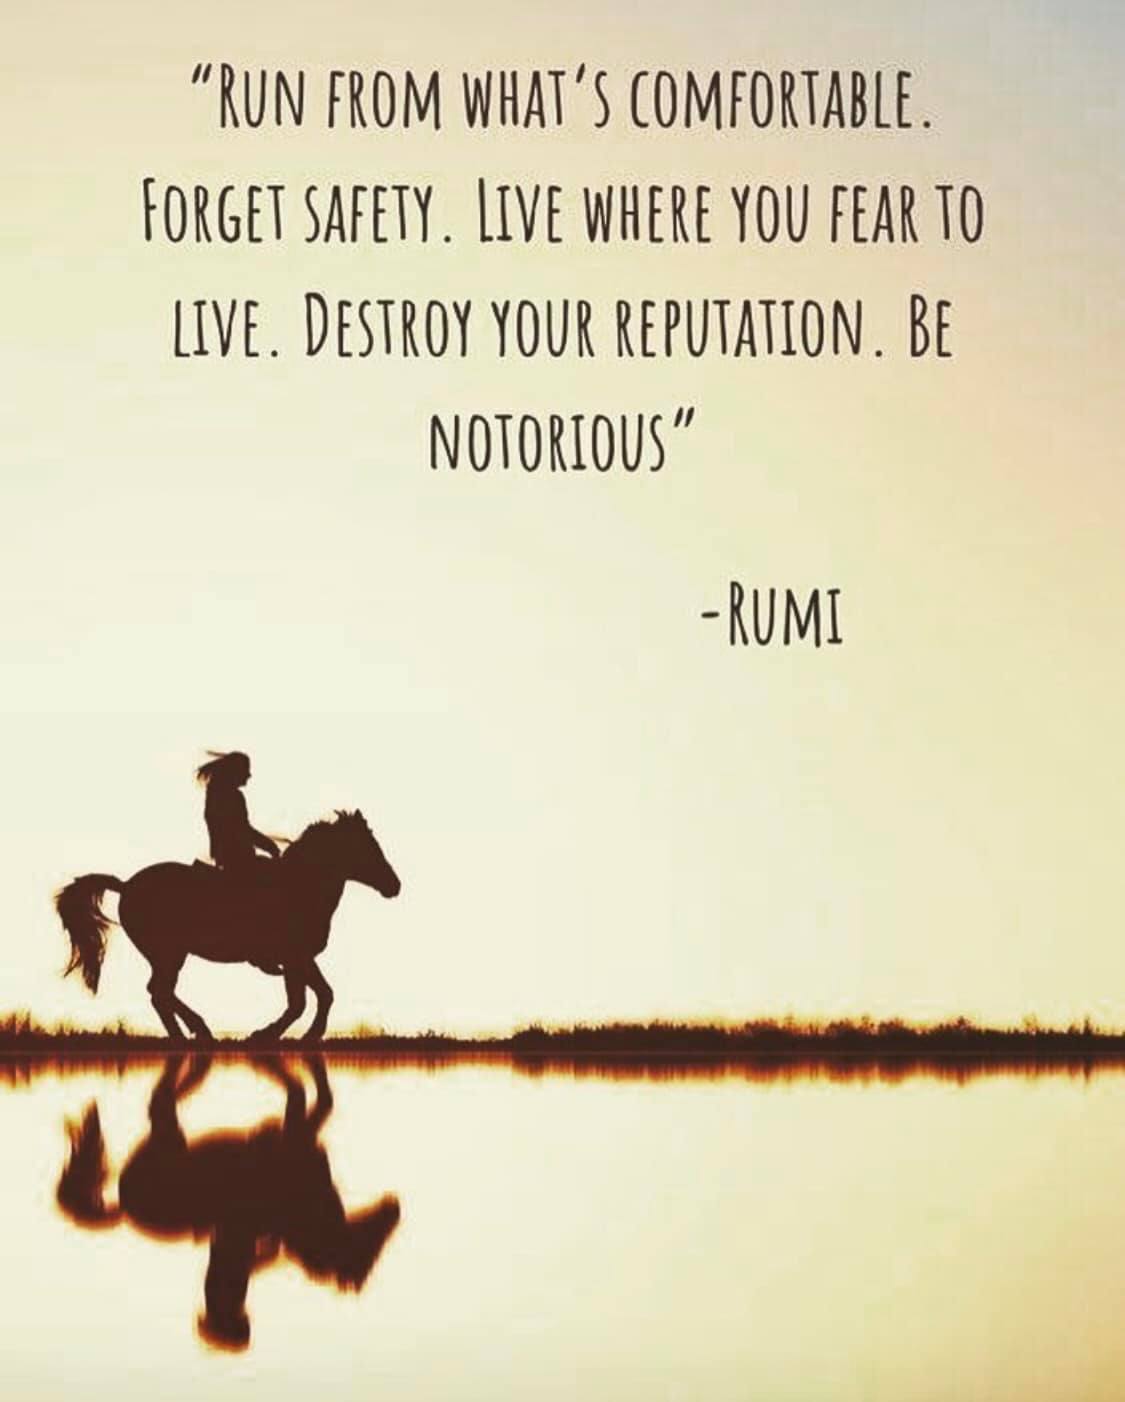 Run from what’s comfortable. Forget safety. Live where you fear to live. Destroy your reputation. Be notorious.